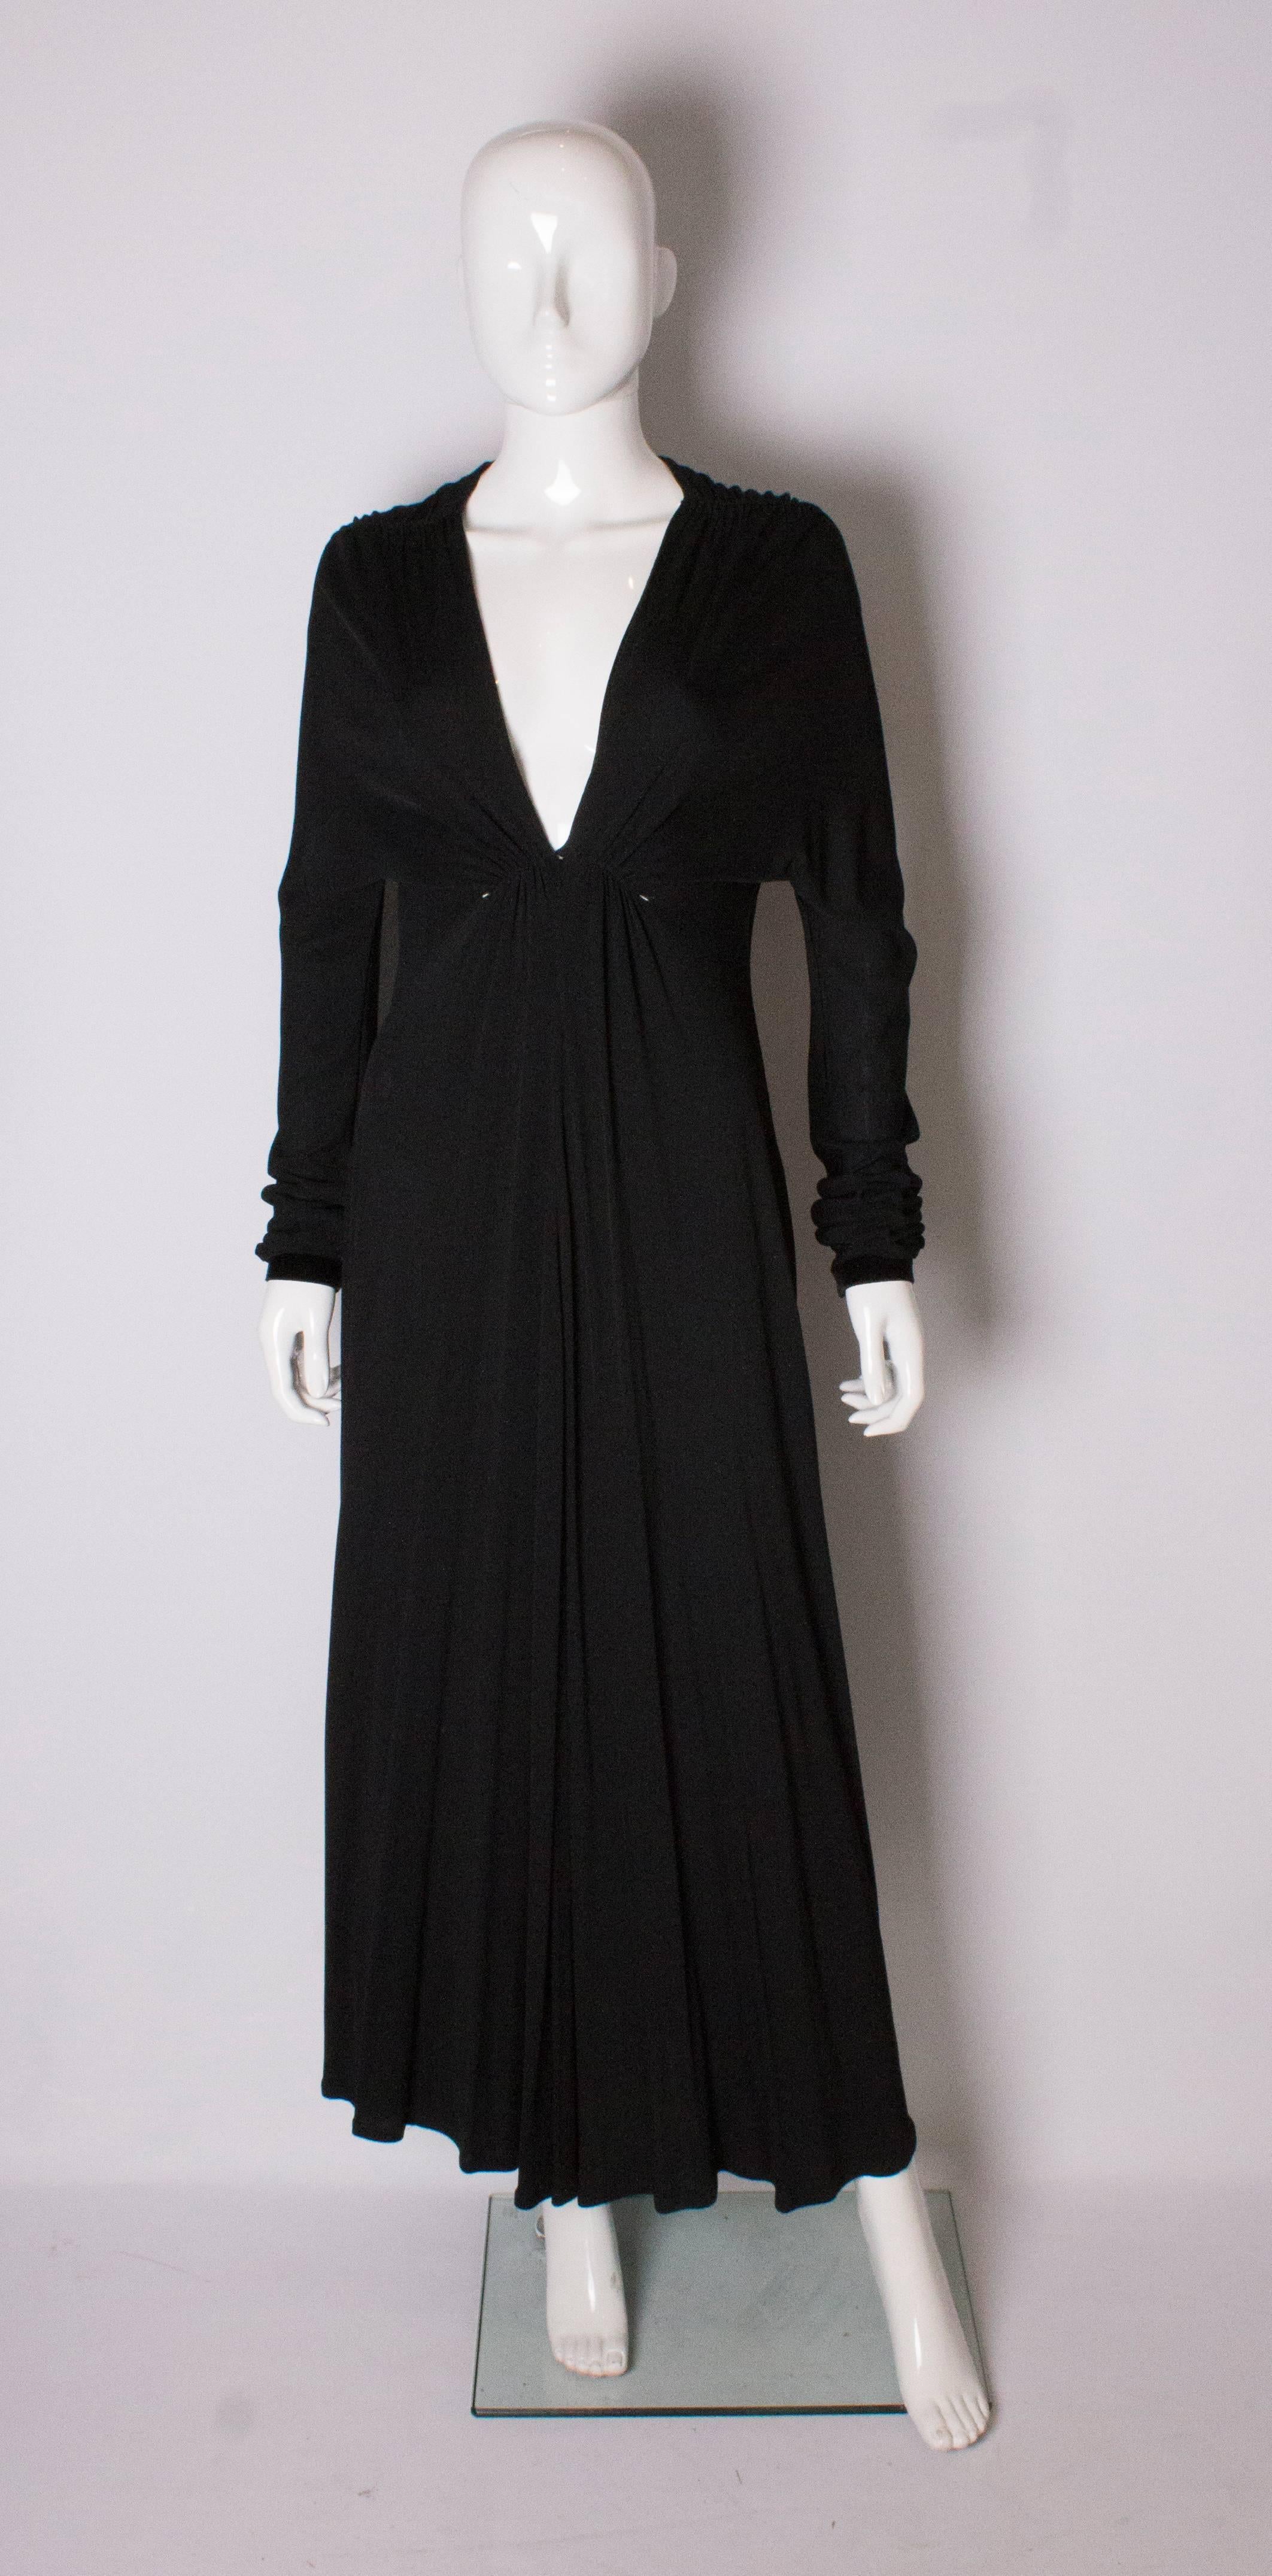 A chic black evening gown by Yves Saint Laurent Rive Gauche. The dress has a v neckline ,pleats at the shoulders and gathering under the bust. The cuffs and neckline are trimmed in black velvet.